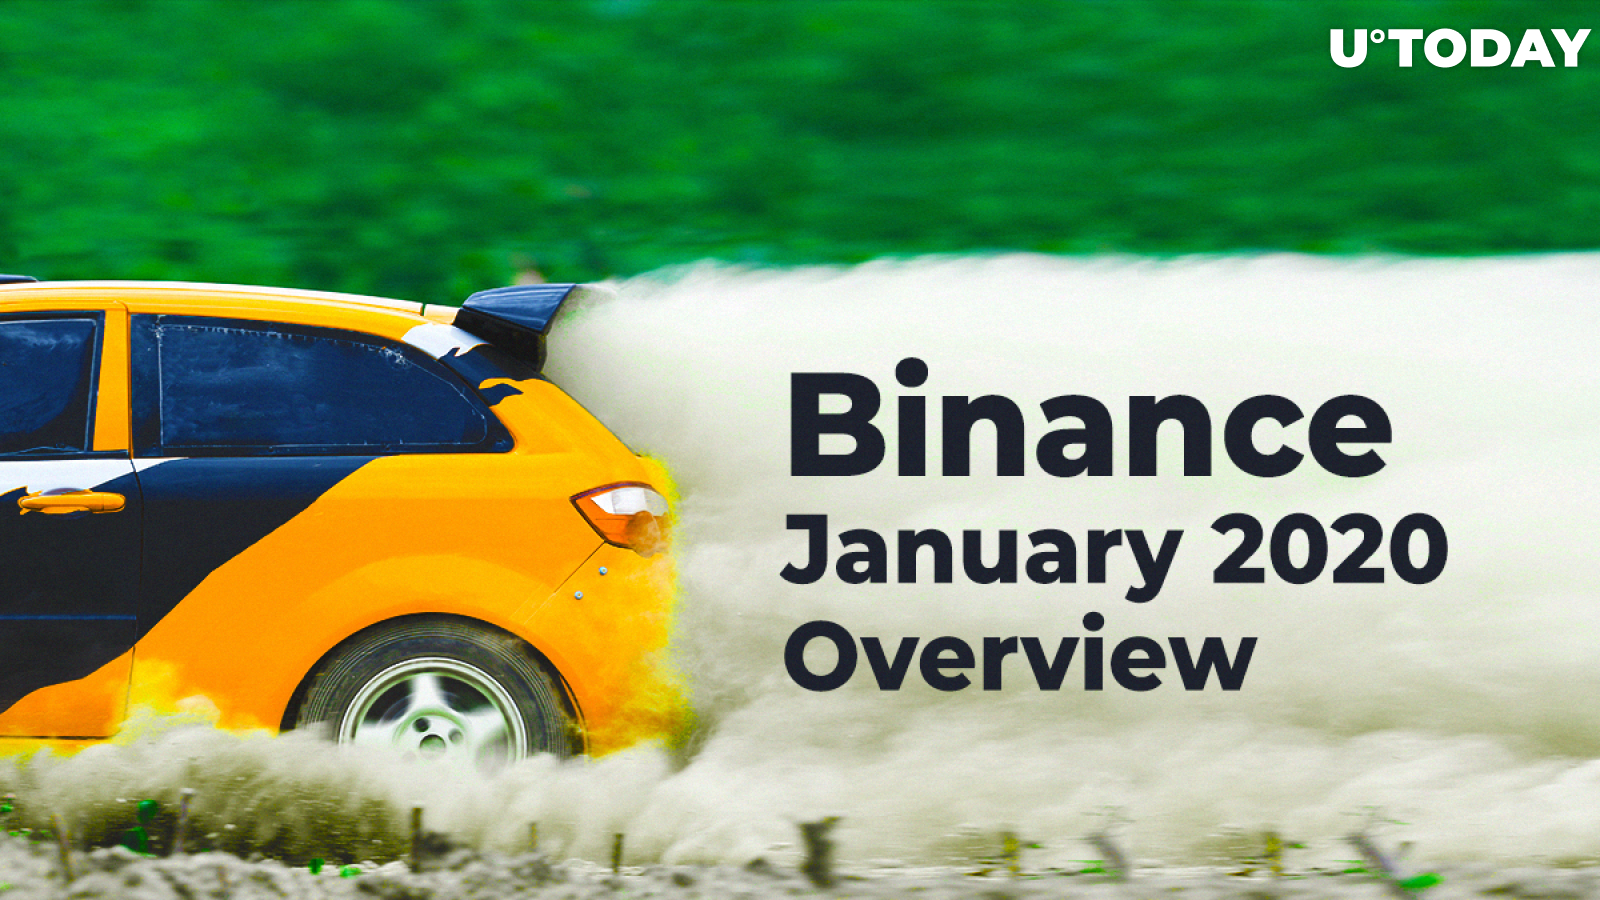 Ethereum's (ETH) Muir Glacier, Altcoins Rally, Futures Record: Binance January 2020 Overview